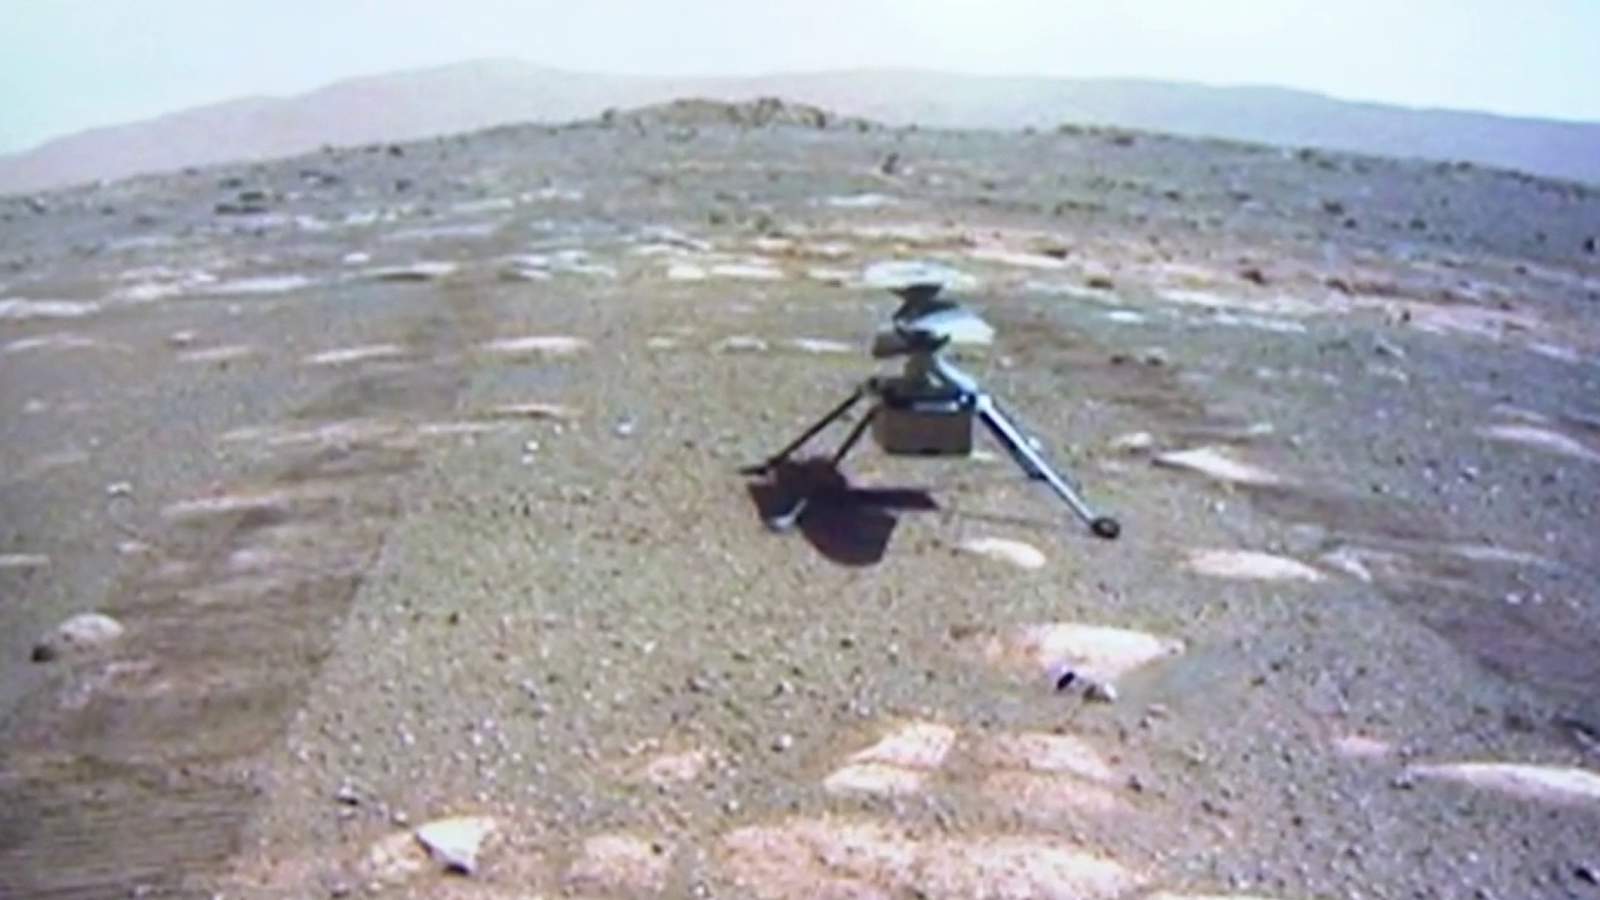 All systems are ‘go’ for NASA chopper’s flight on Mars